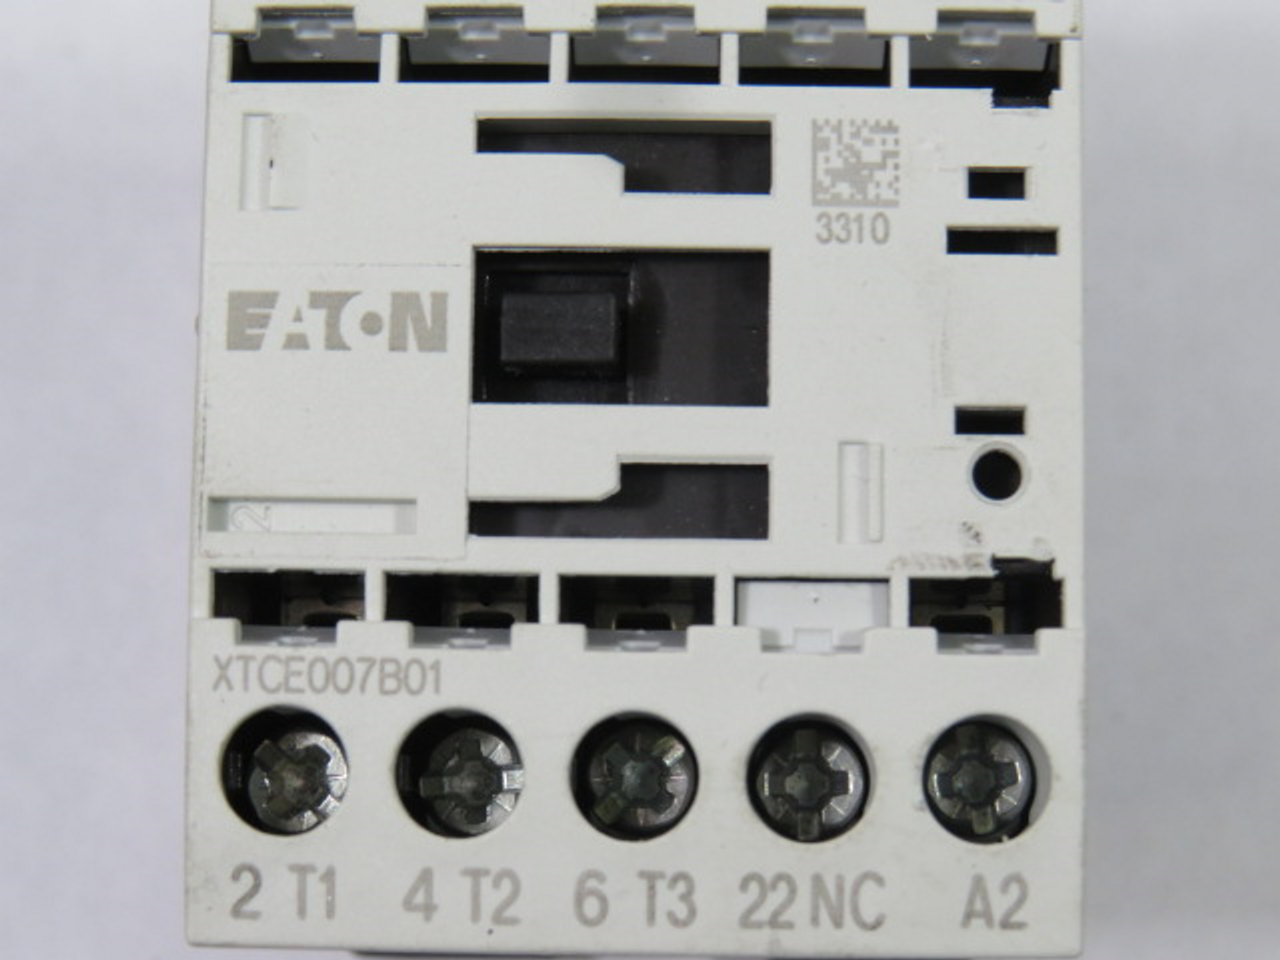 Eaton XTCE007B01A Contactor 110V/50Hz. 120V/60Hz. COSMETIC DAMAGE USED